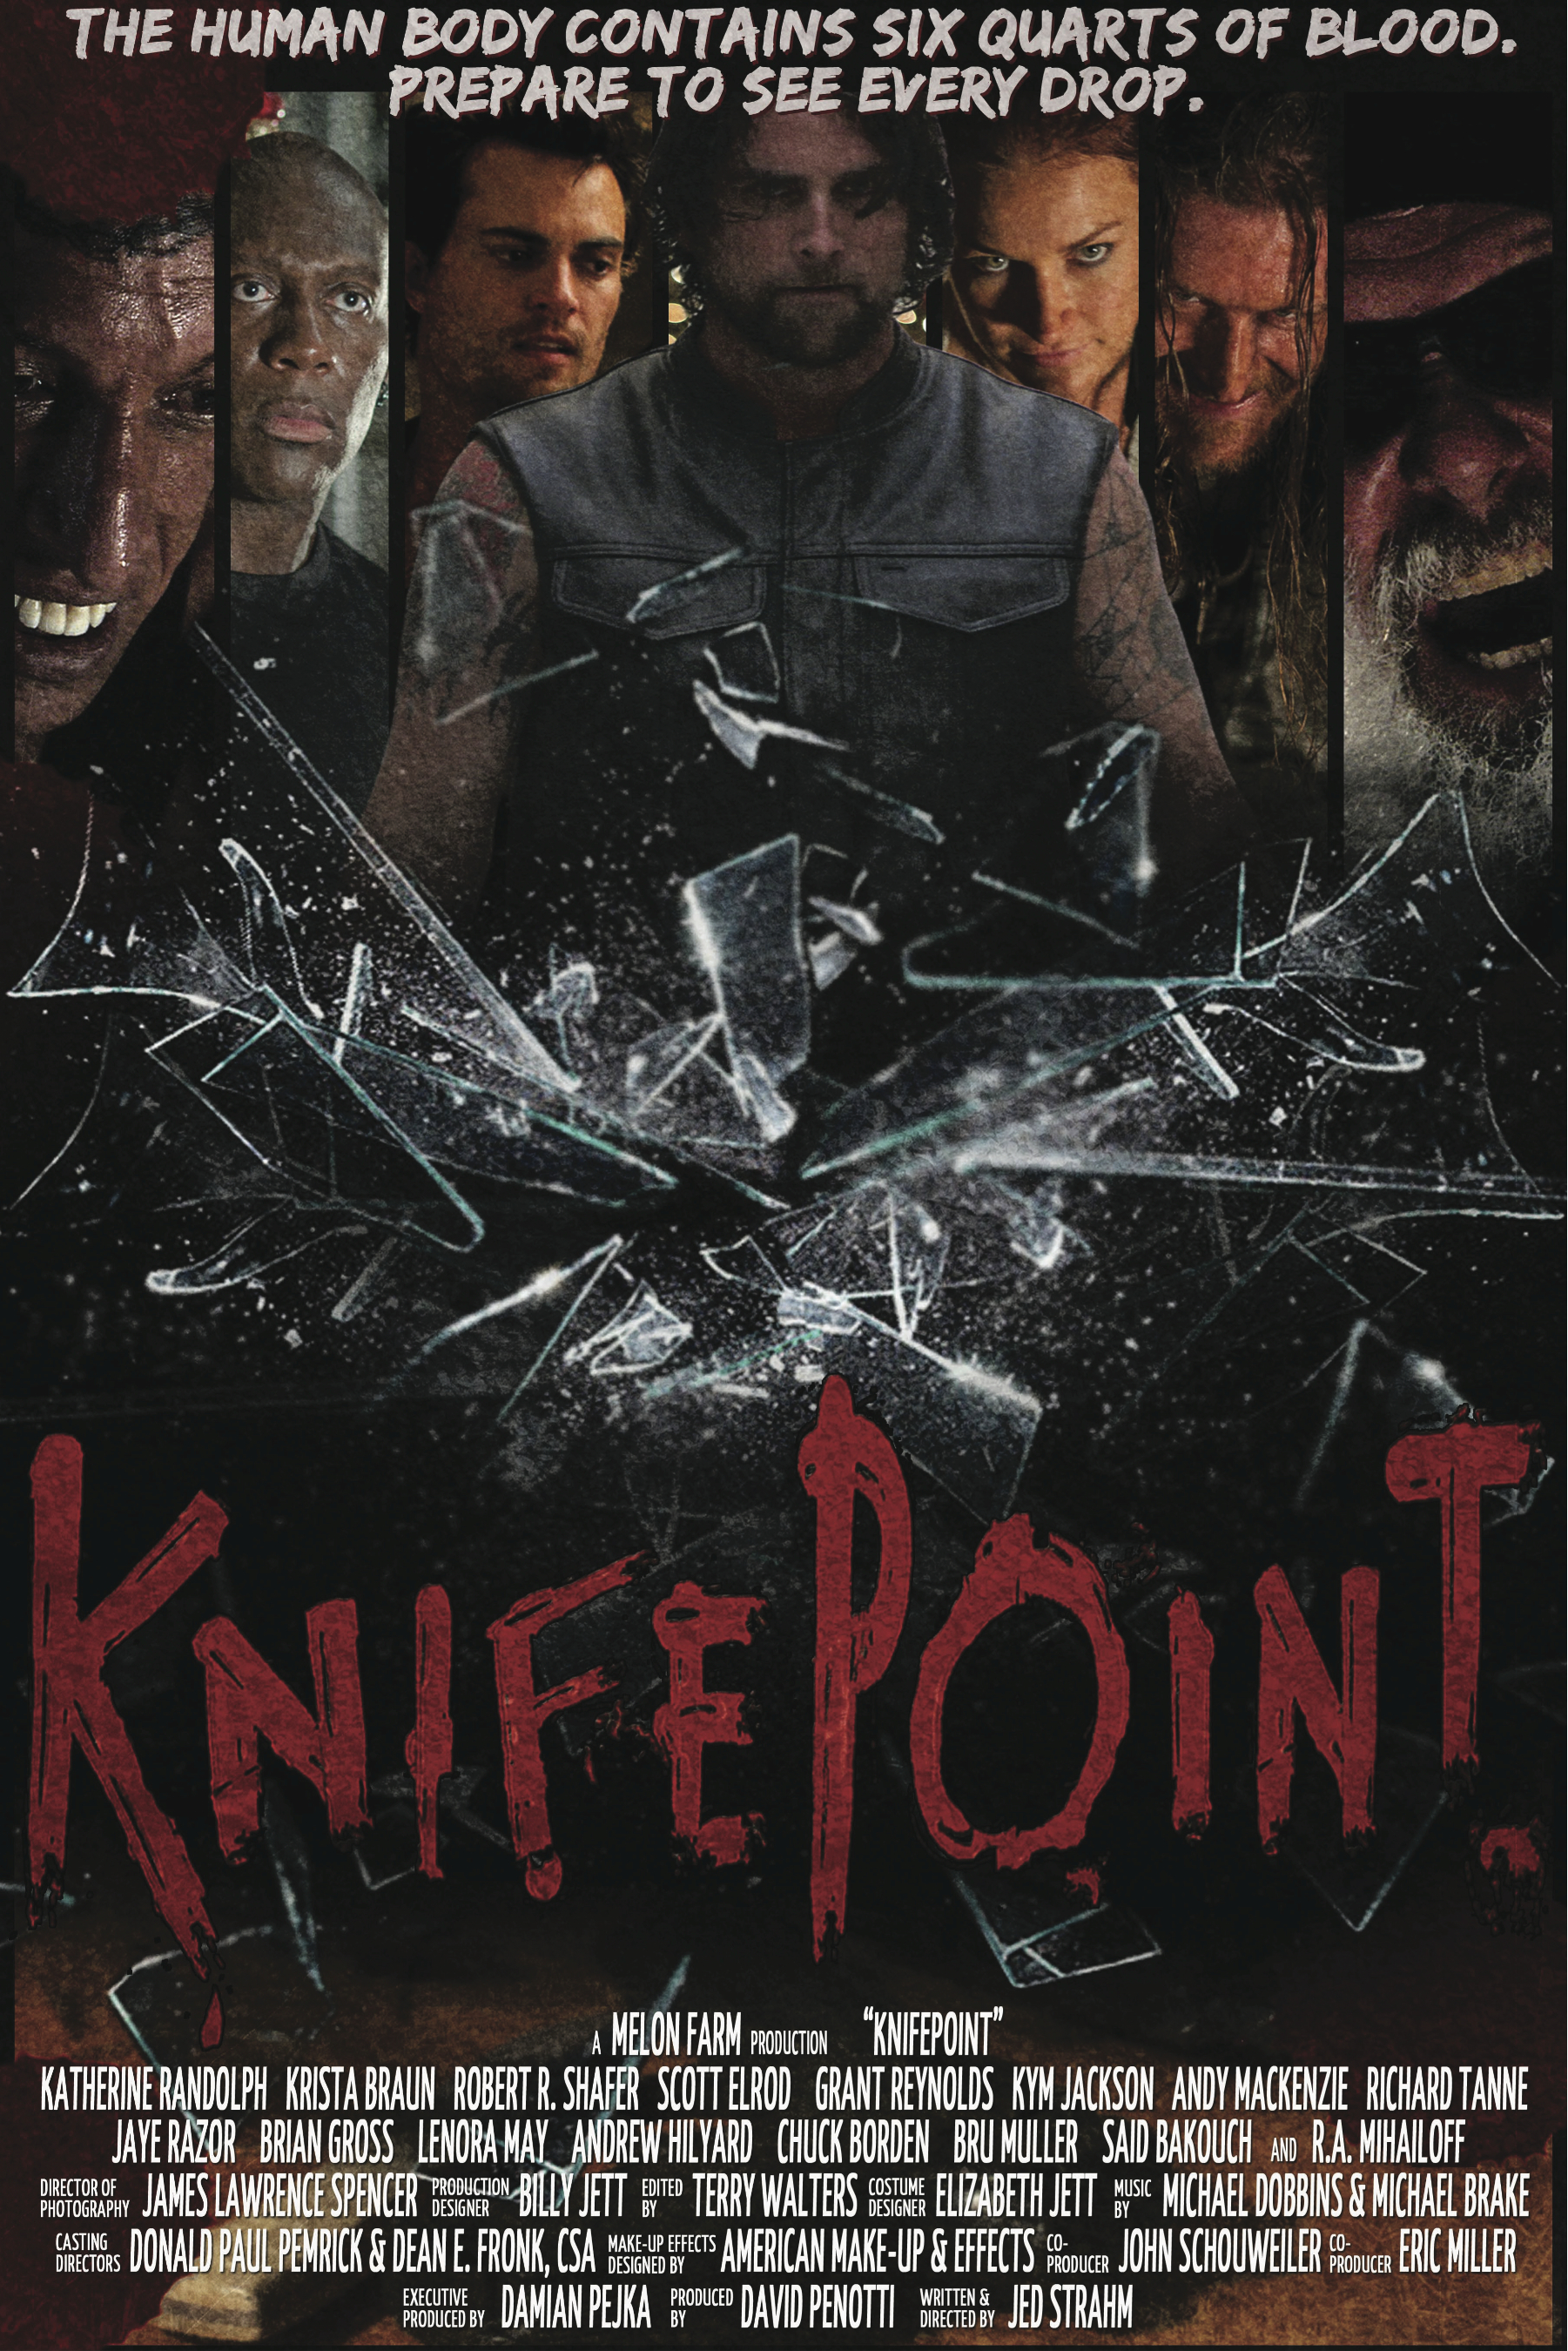 This is the image we struck for the posters we plastered up for the KNIFEPOINT world premiere at the 2011 Fantasia International Film Festival in Montreal!